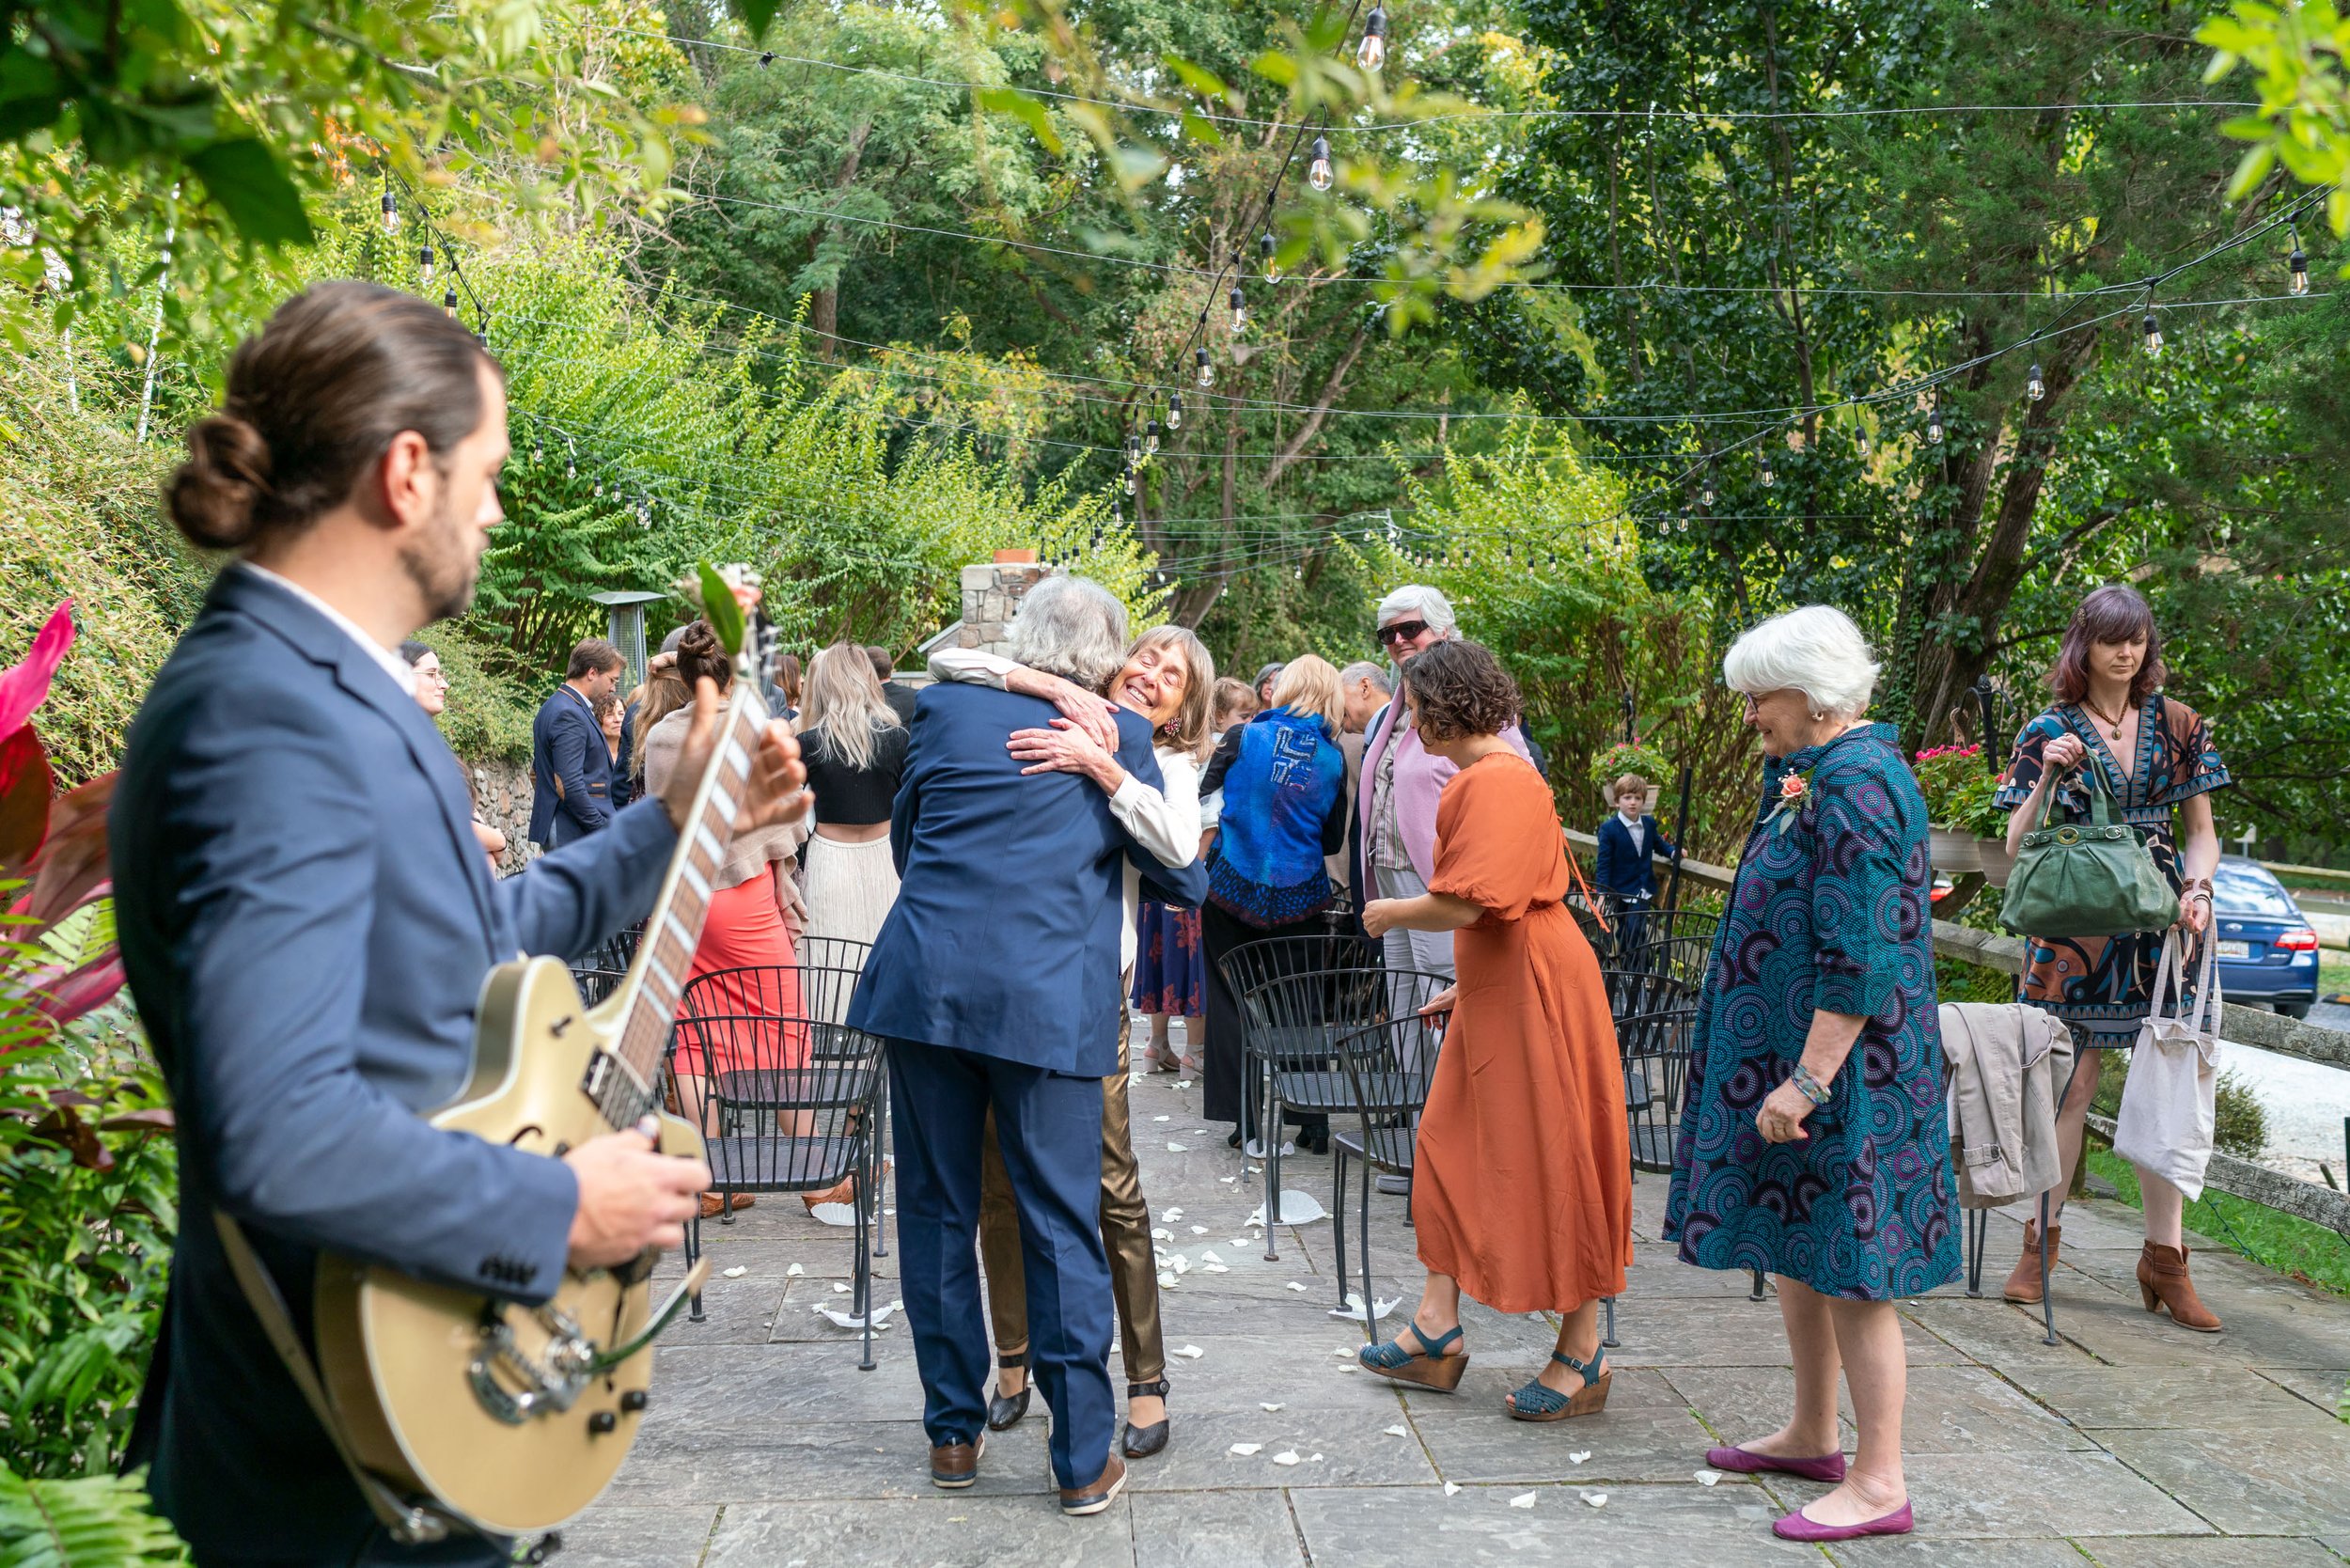 Guitarist plays music on terrace while guests hug and celebrate